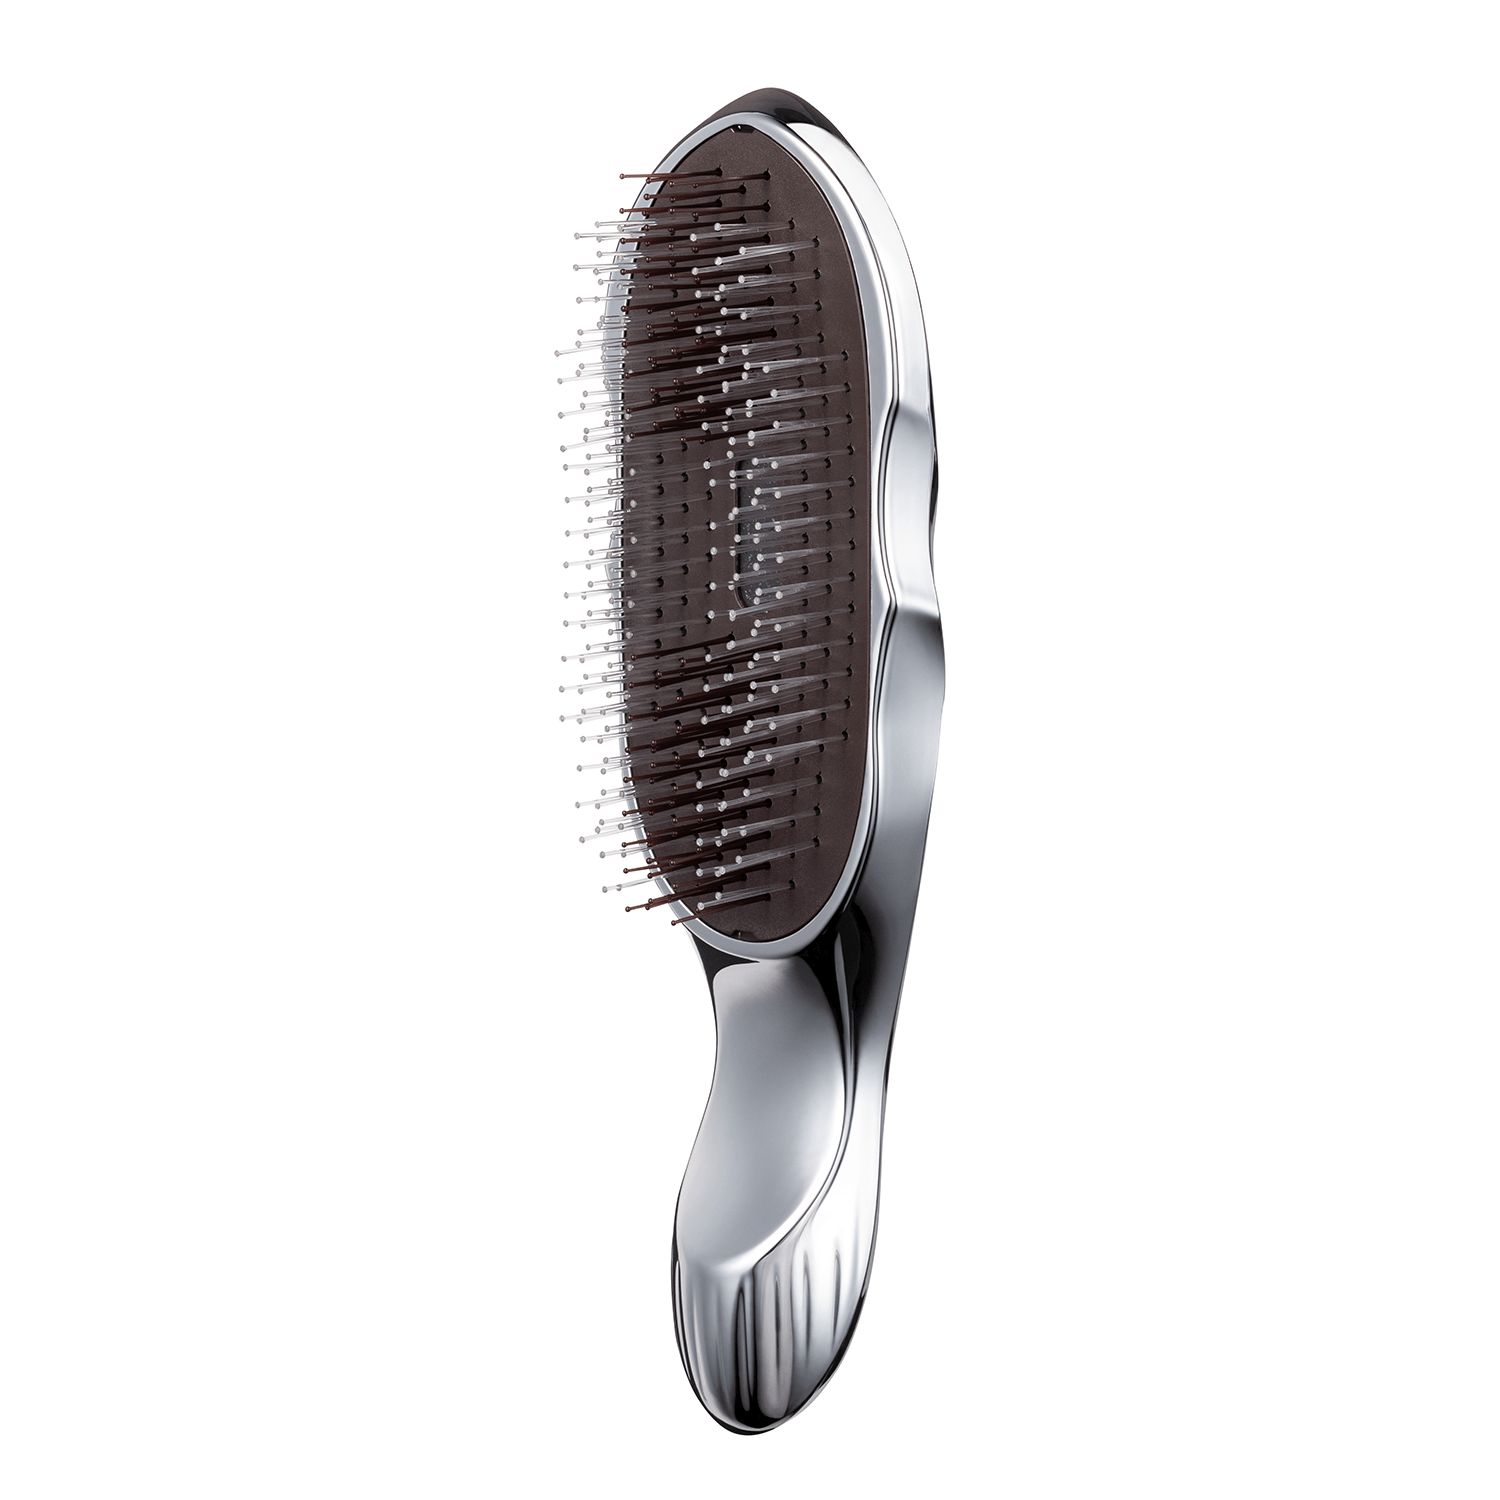 Introducing the ReFa ION CARE BRUSH, for a daily brushing routine to help your scalp feel cleaner and healthier.